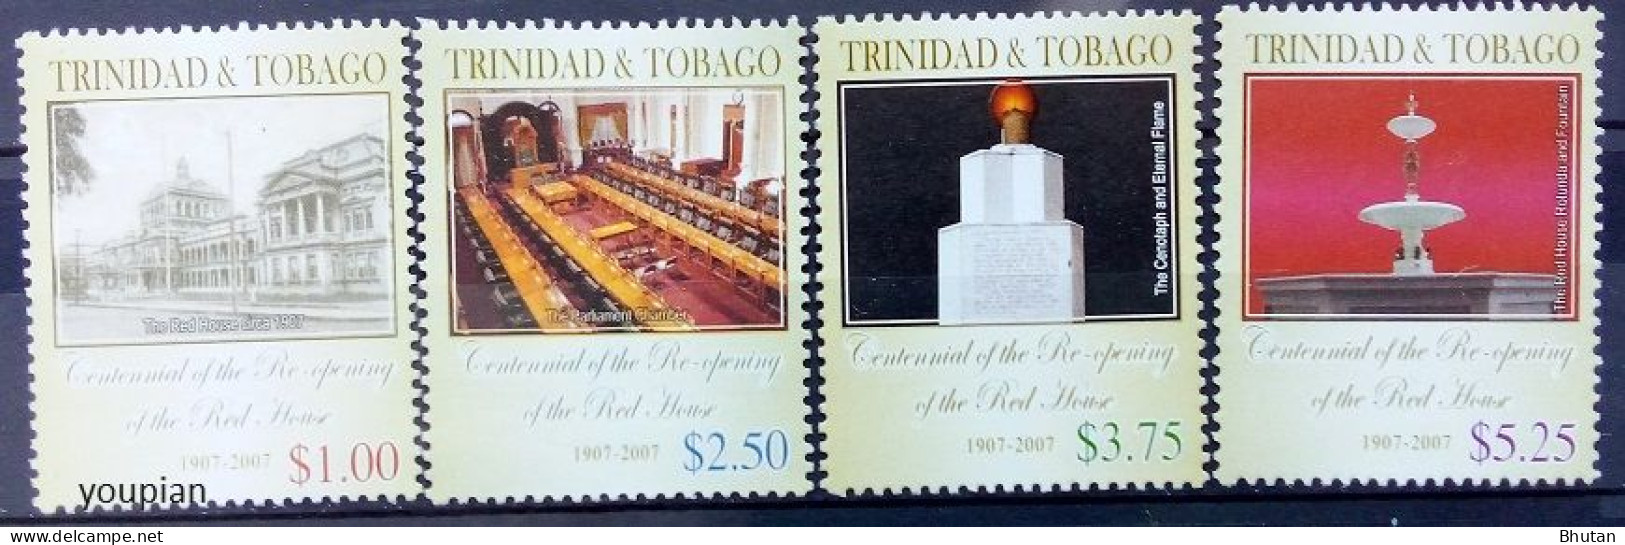 Trinidad And Tobago 2007, 100th Anniversary Of The Inauguration Of The New Parliament Building, MNH Stamps Set - Trinidad & Tobago (1962-...)